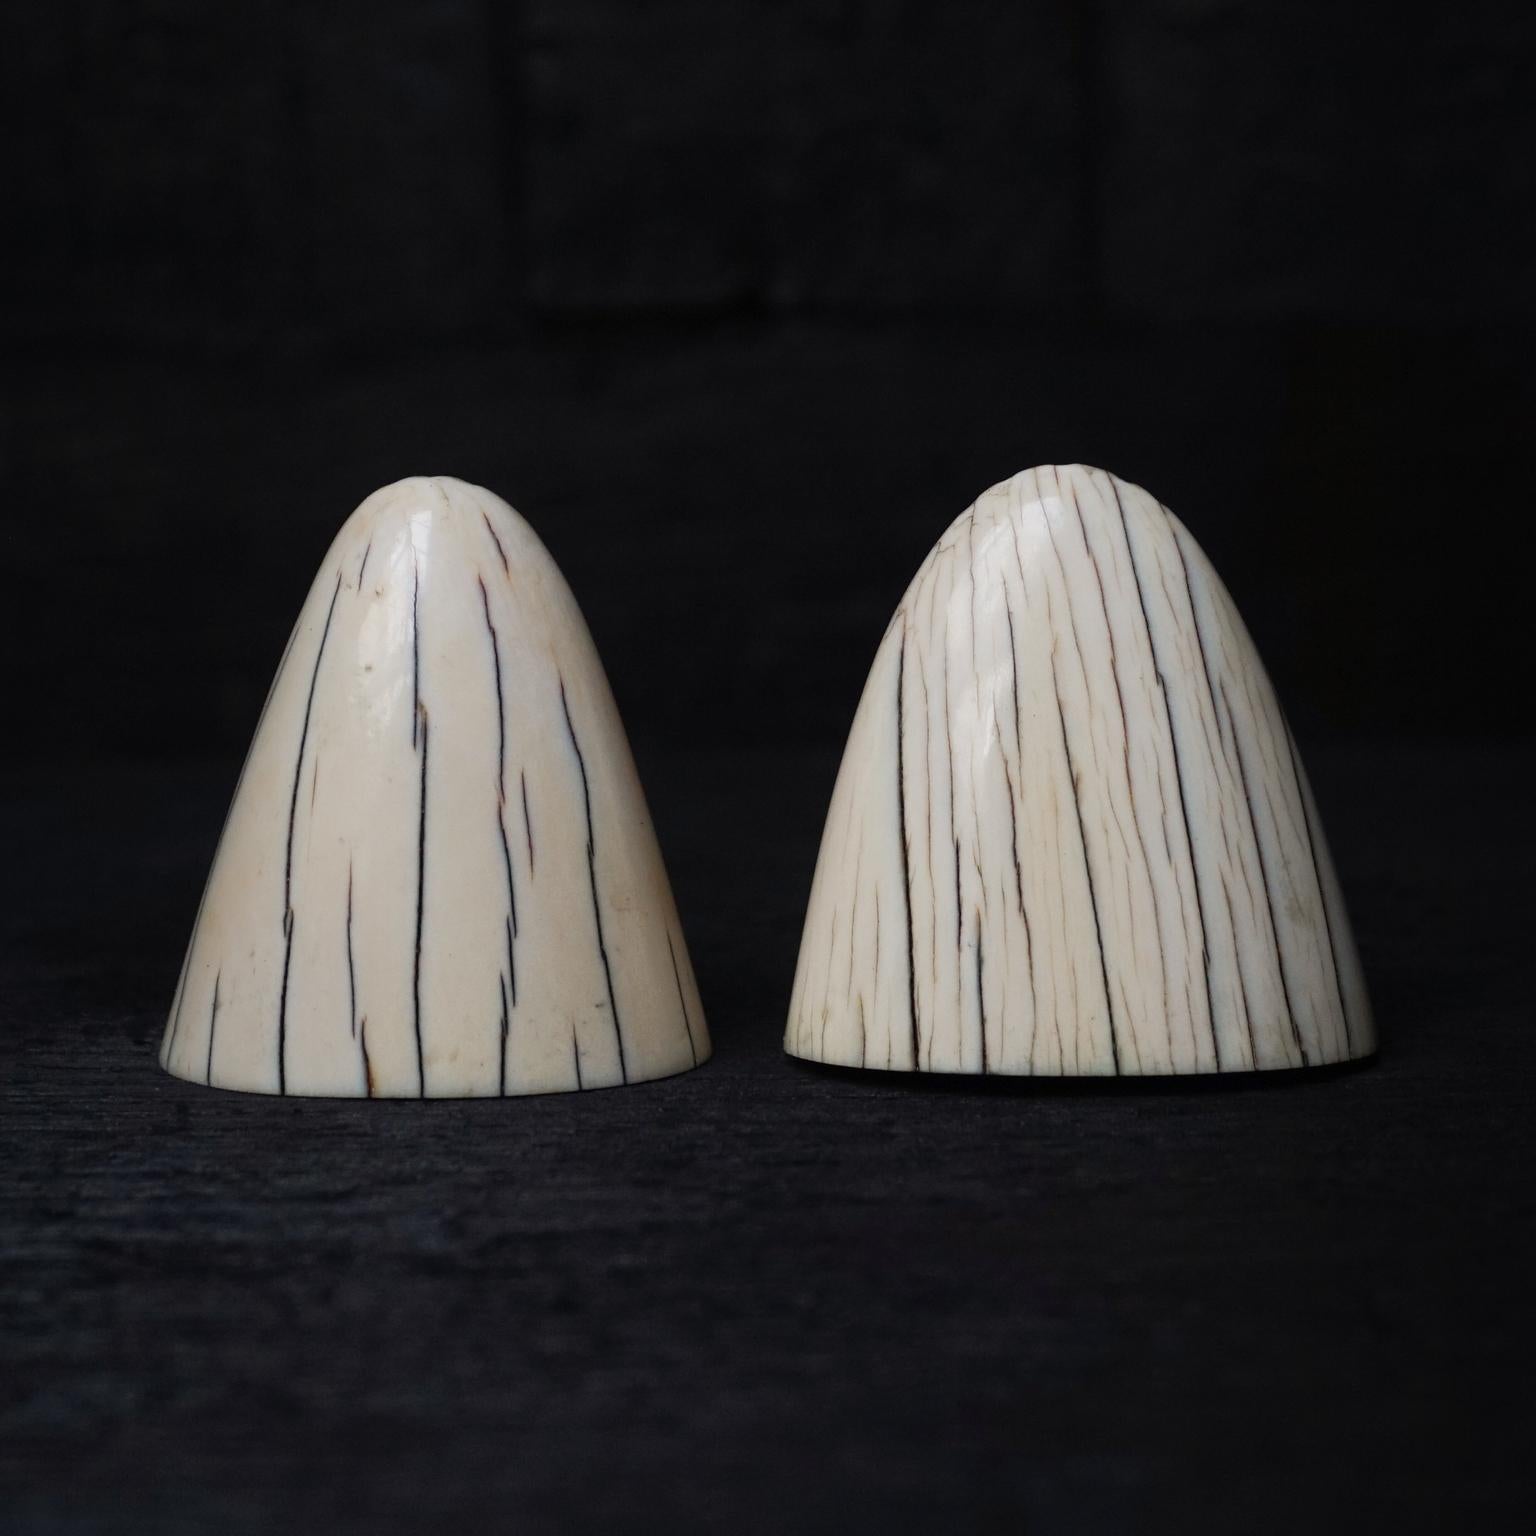 This unique salts and pepper shaker set is made from the tips of walrus tusks.
Look at this pretty powerful line pattern.
This very elegant Art Deco shaker set would look great completing a condiment set on any dining table.

Finished with a